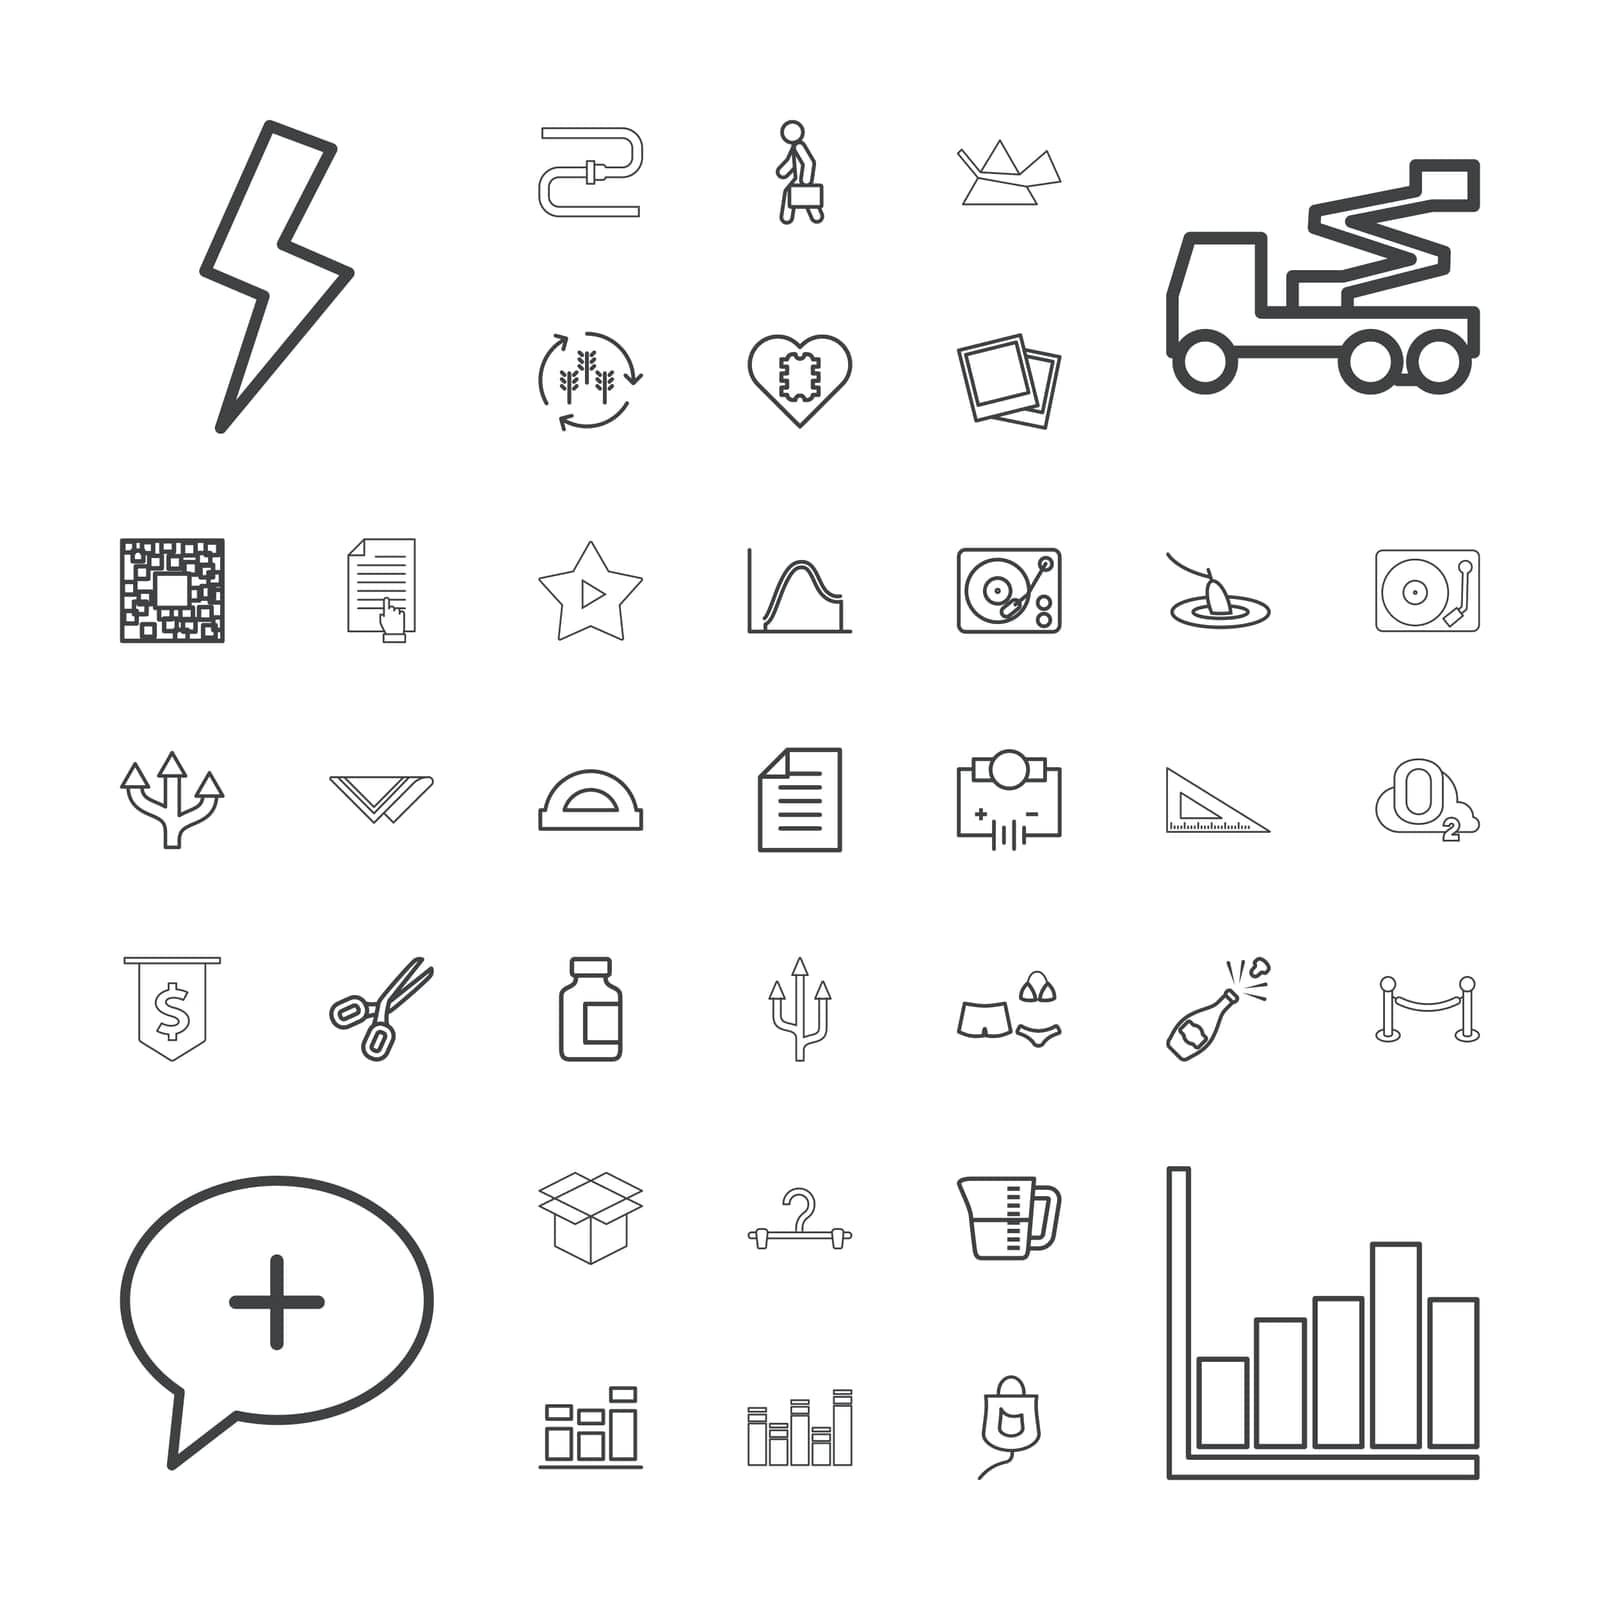 medical,code,arrow,line,document,icon,box,bottle,ruler,dollar,gramophone,music,paper,intersection,champagne,pointing,pipe,swimsuit,vector,man,oxygen,hanger,case,on,crane,qr,harvest,set,in,fishing,photo,cpu,electricity,graph,heart,o,scissors,with,cravat,protractor,fence,favorite,flash by ogqcorp